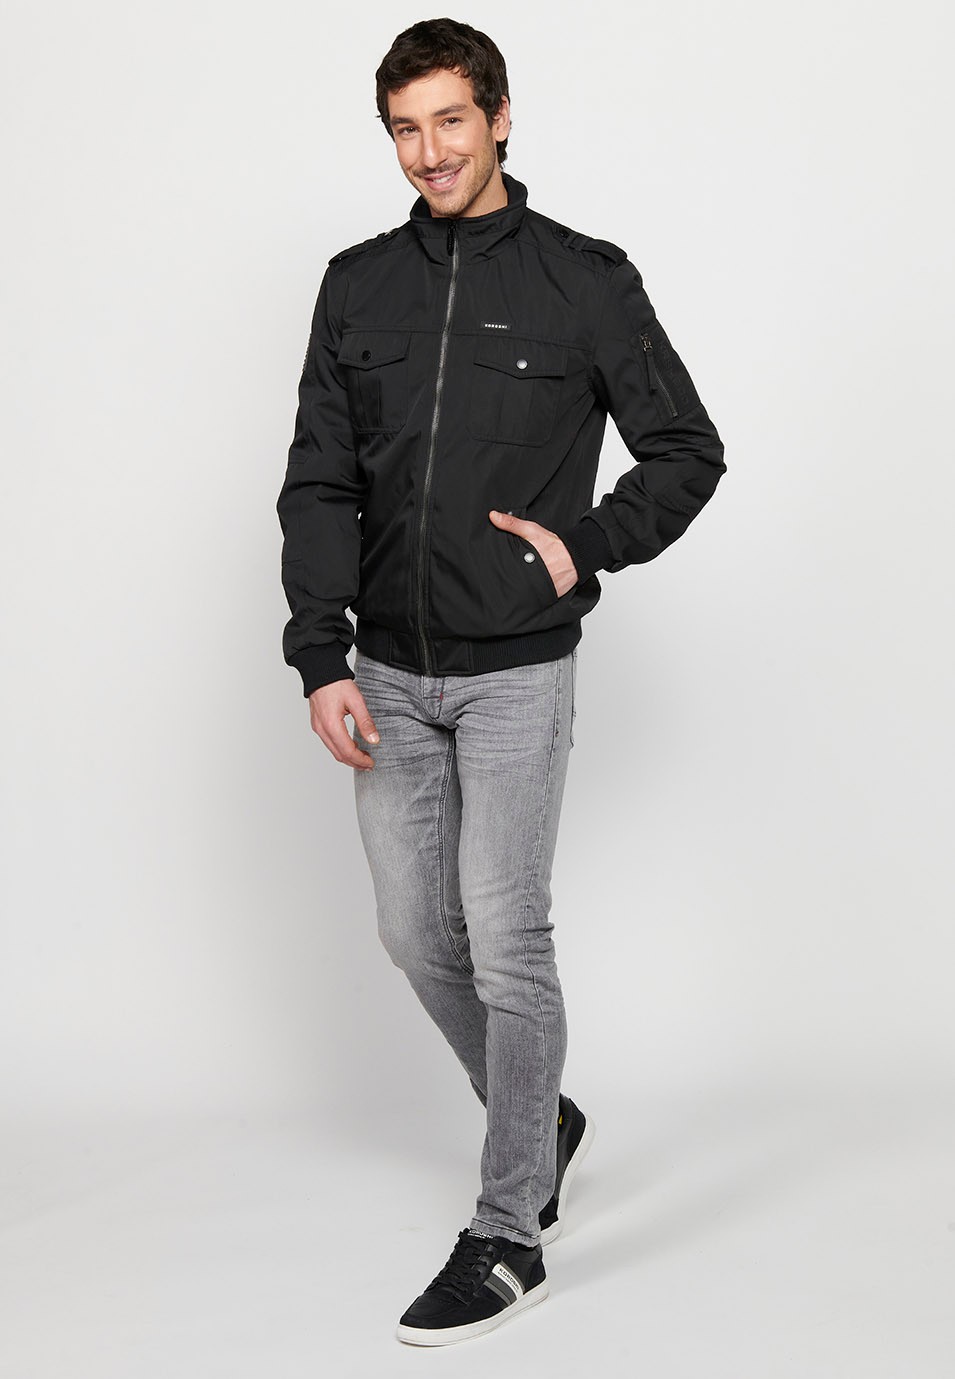 Black Long Sleeve Jacket with Round Neck and Front Zipper Closure with Flap Pockets for Men 3